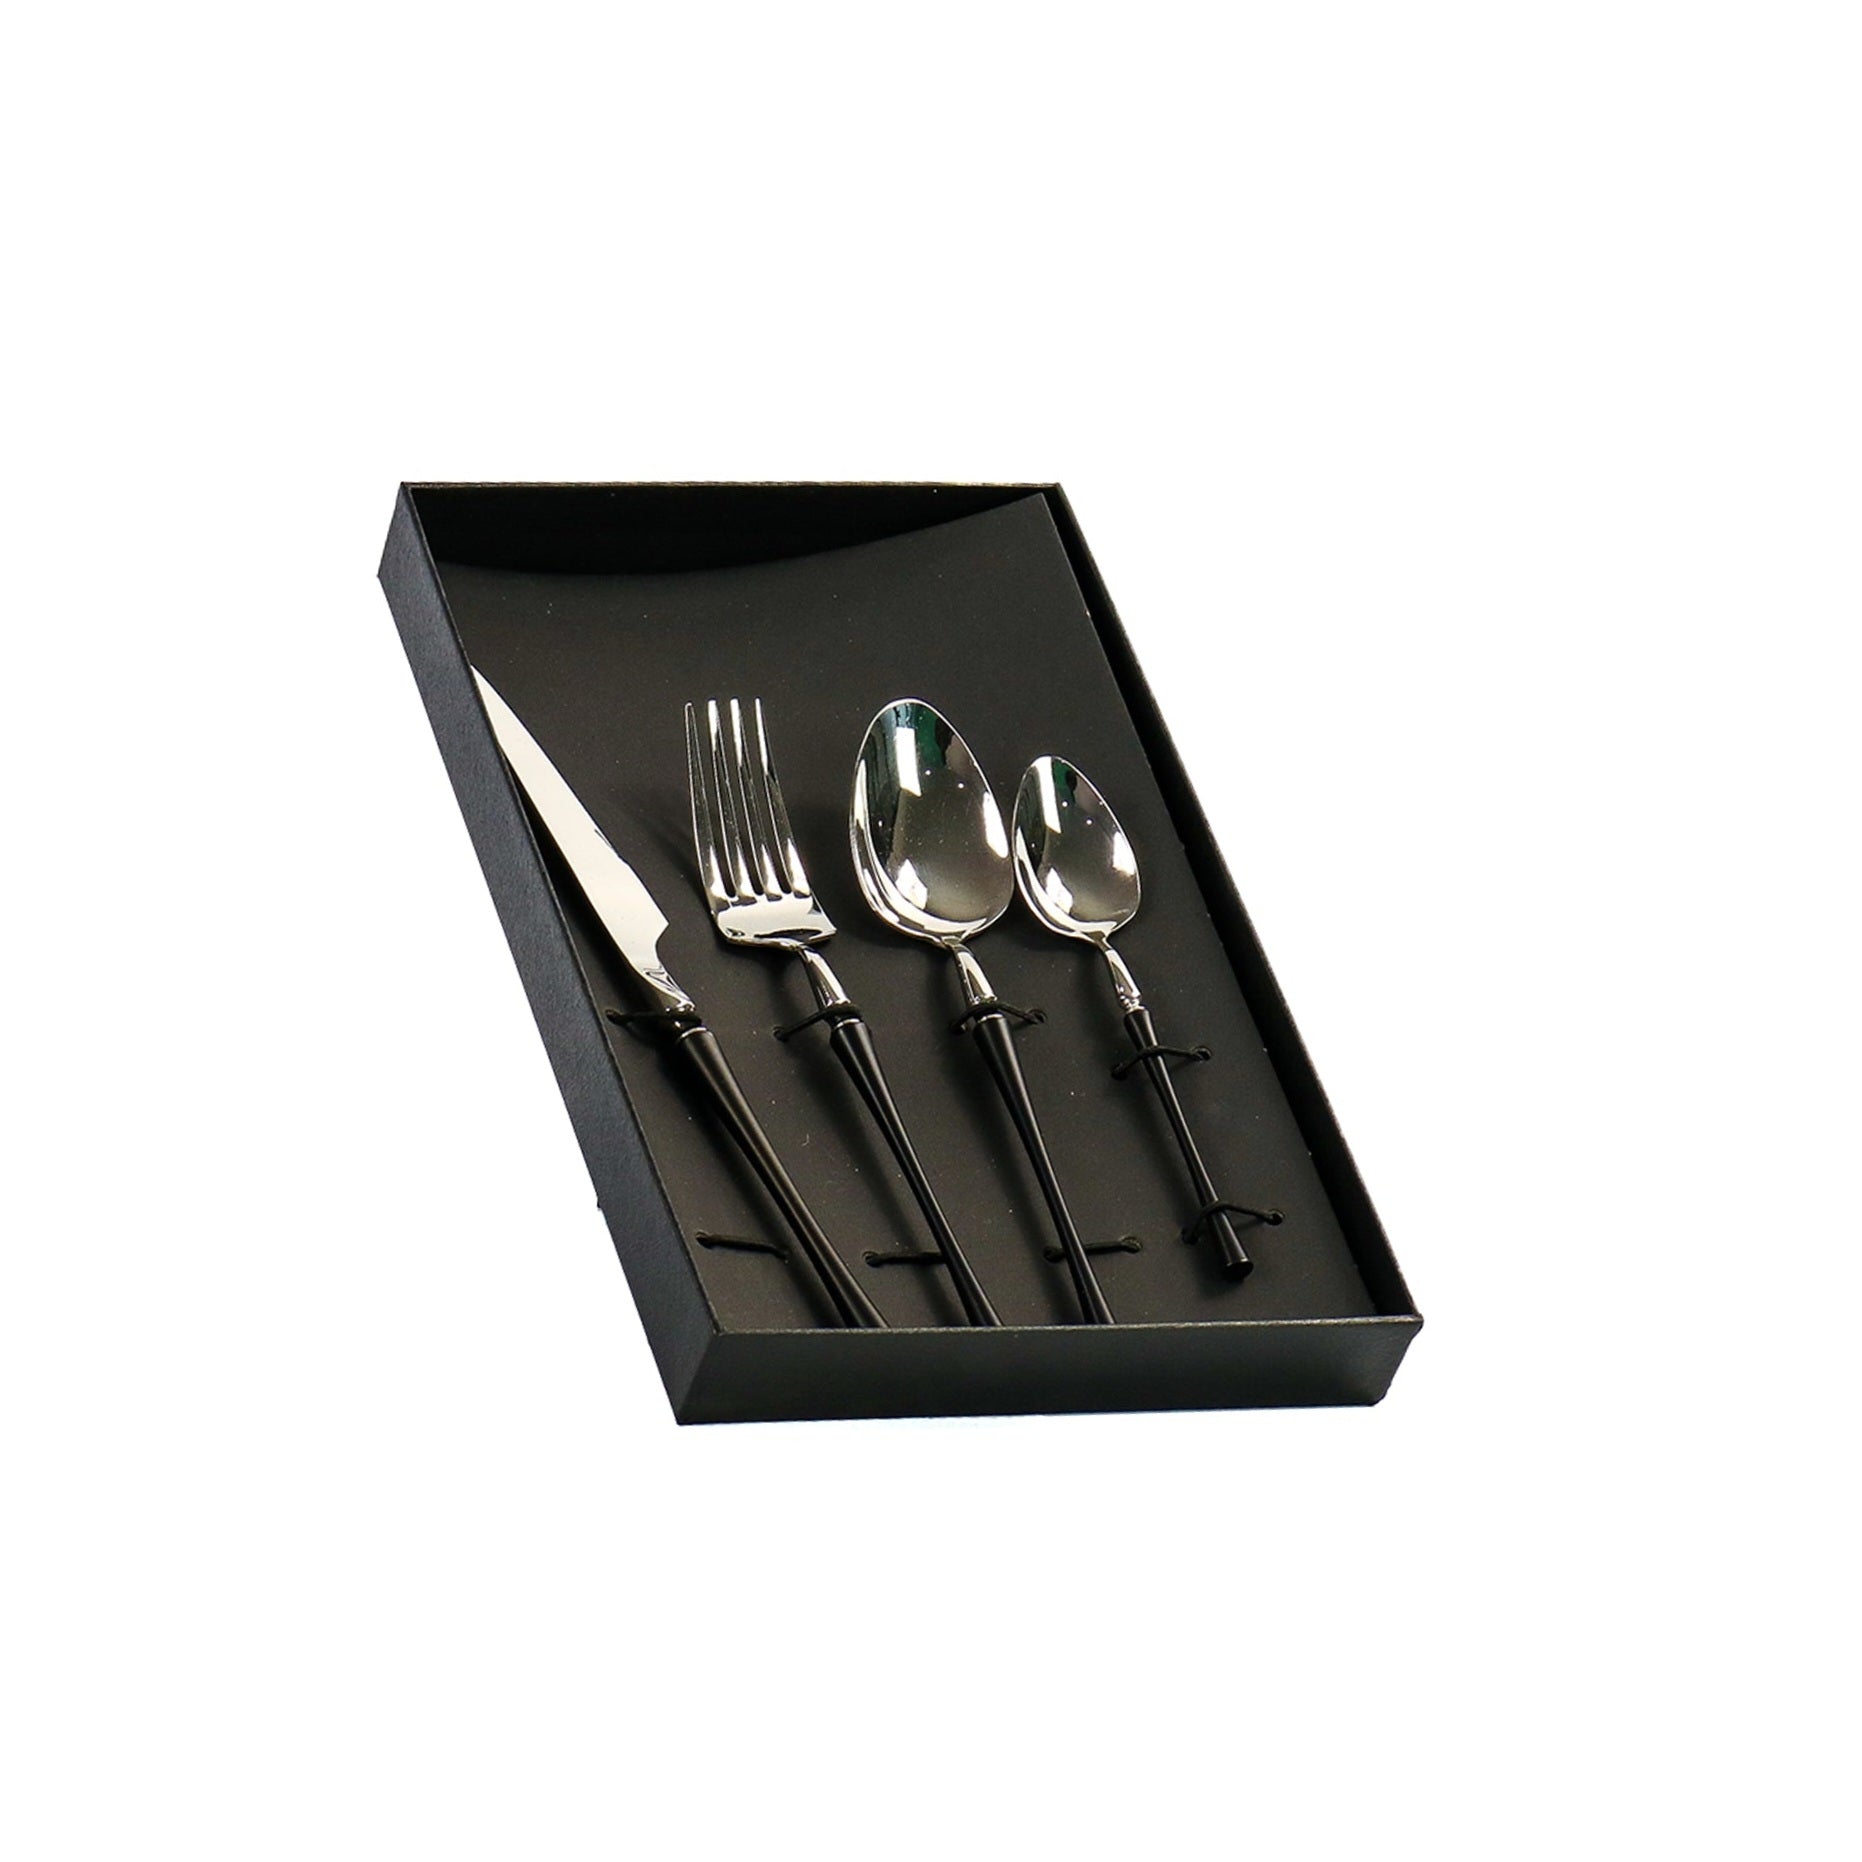 Cutlery Set Stainless Steel 4pc Black Silver 013